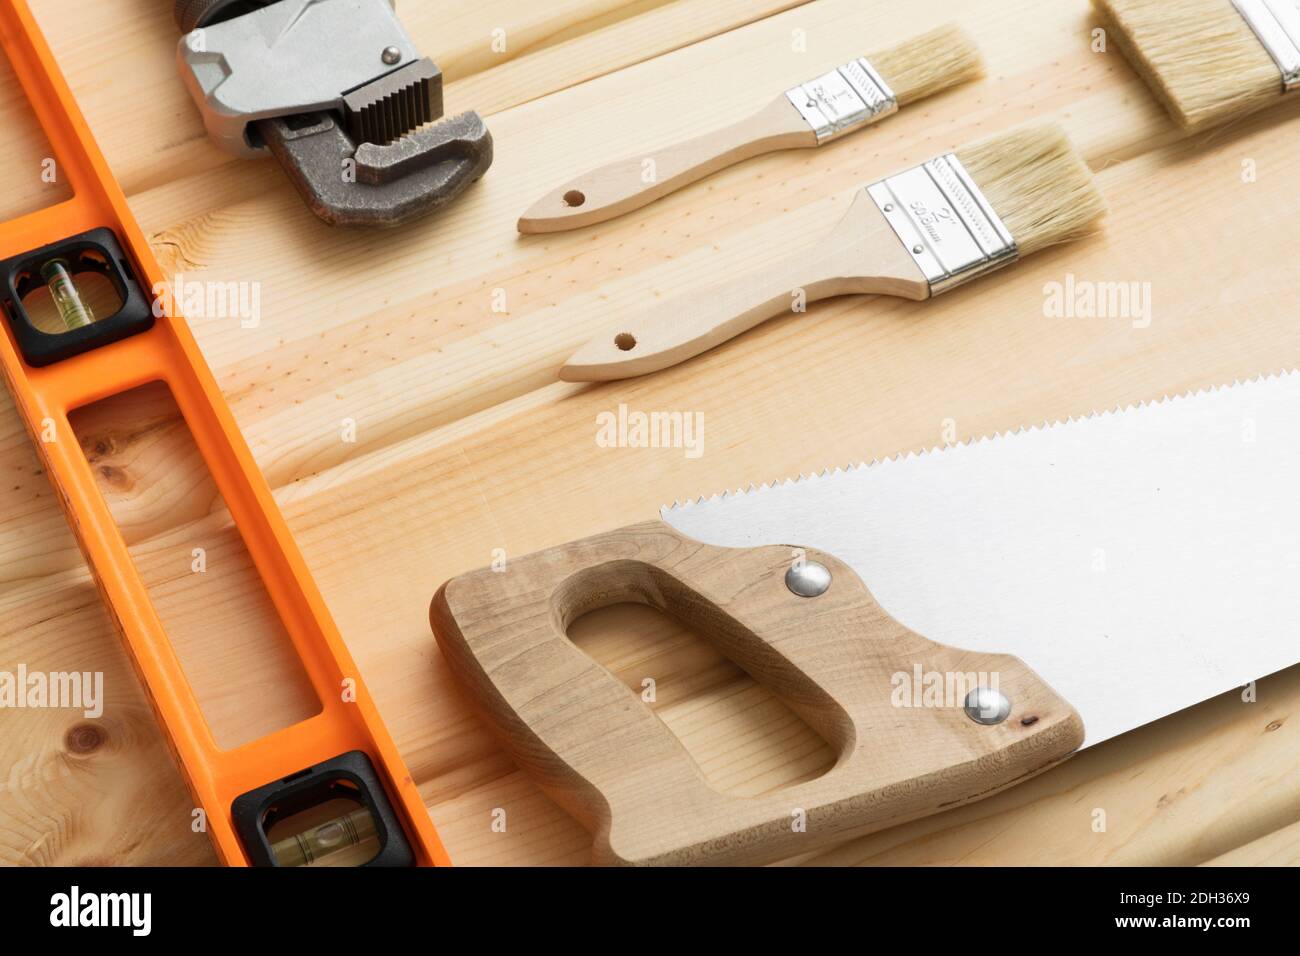 Tools laying on wood Stock Photo